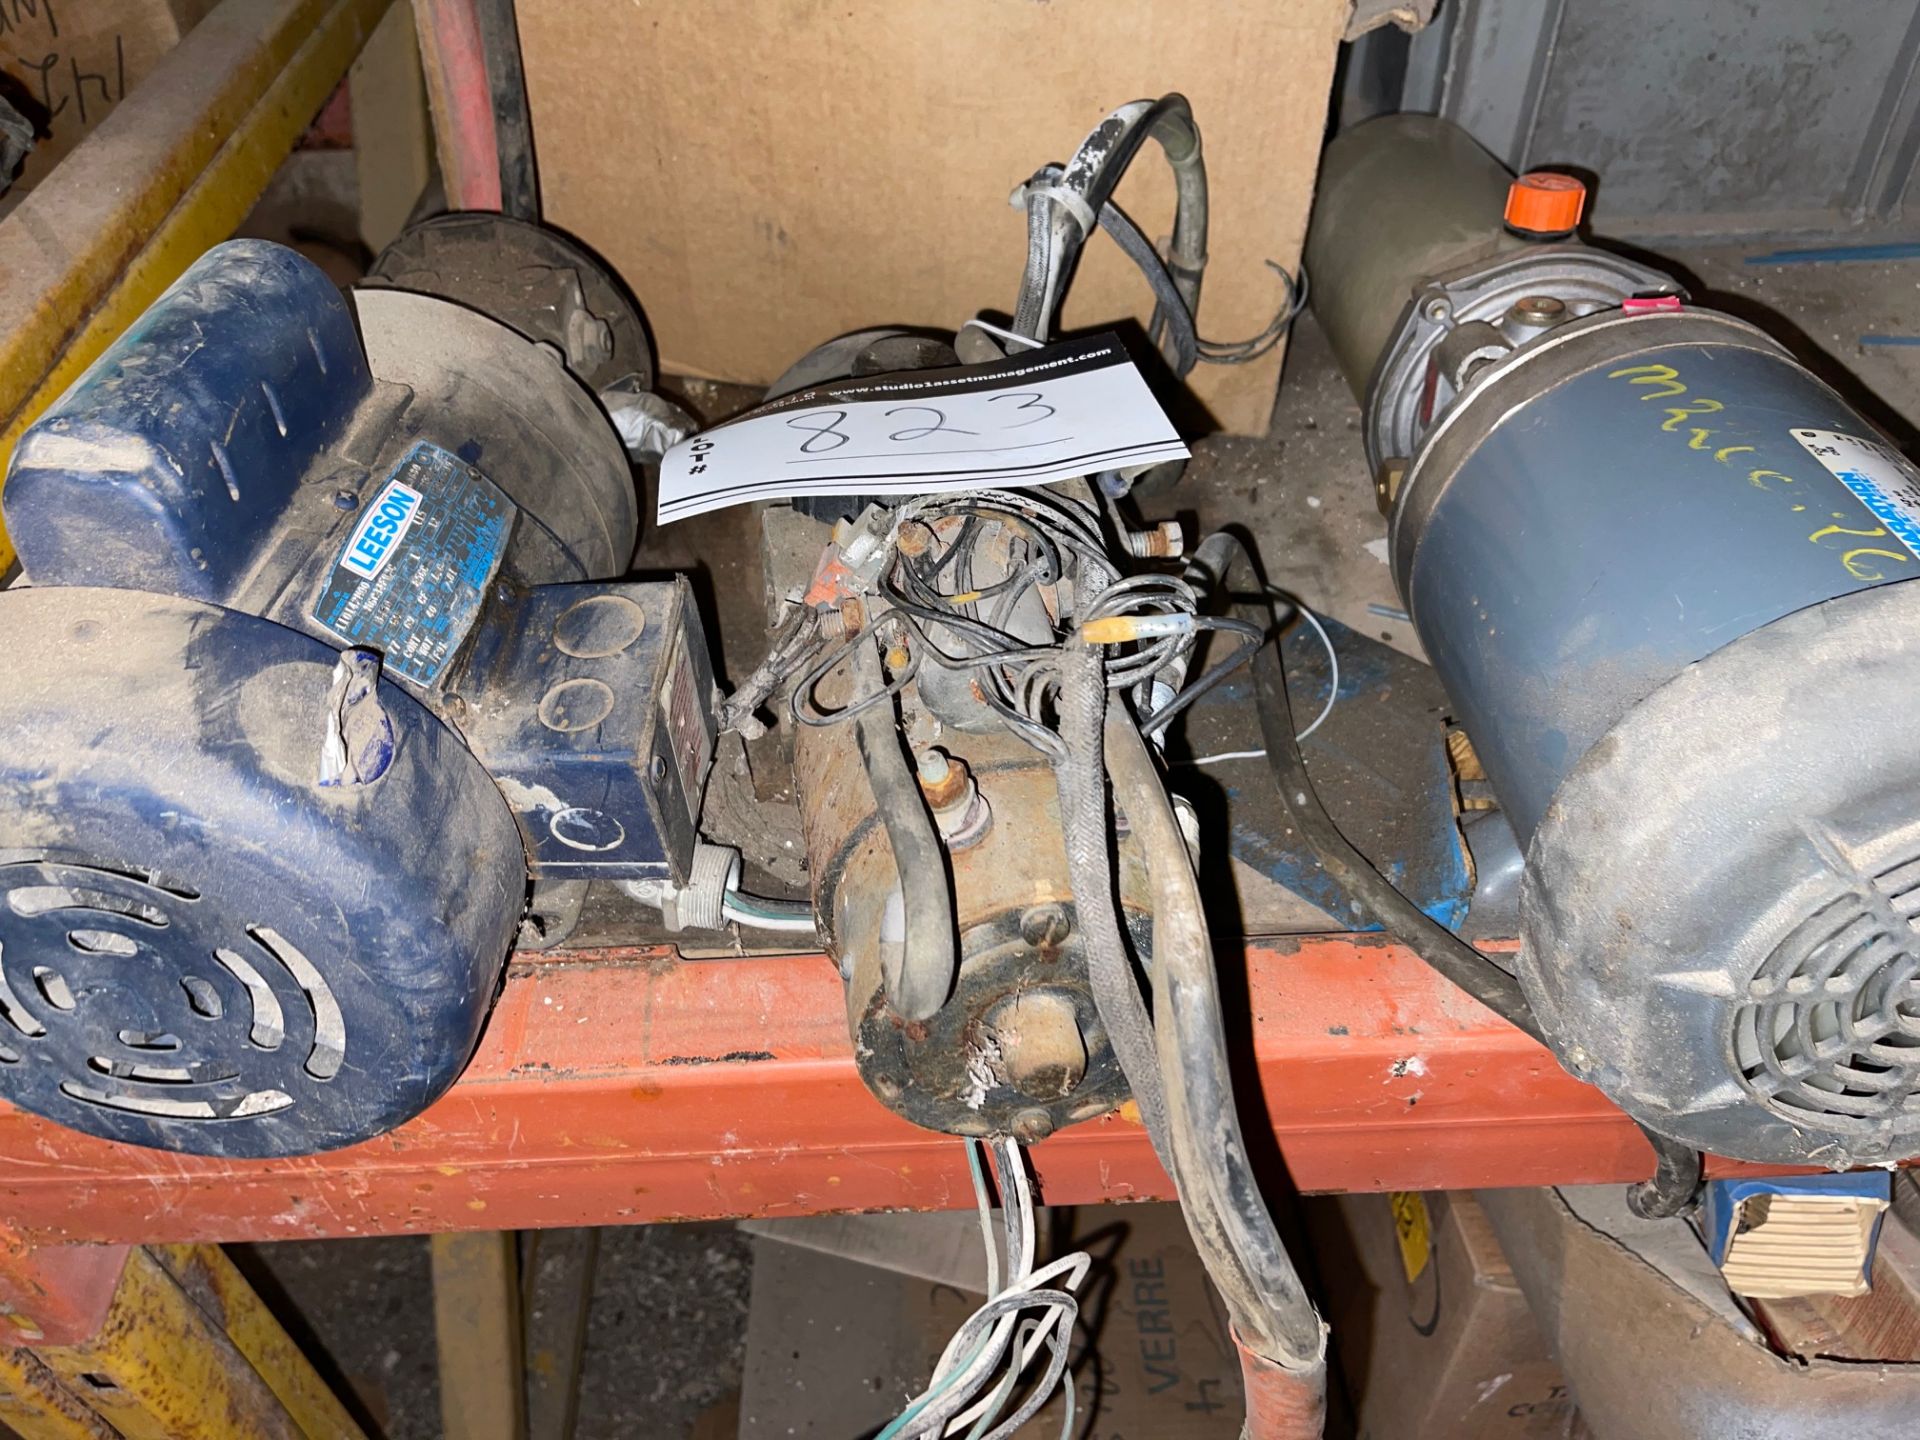 115208/230 VOLT HYDRAULIC PUMPS, ONE MISSING HOUSING AND 1 DC STYLE HYDRAULIC PUMP 12 OR 24 VOLTS